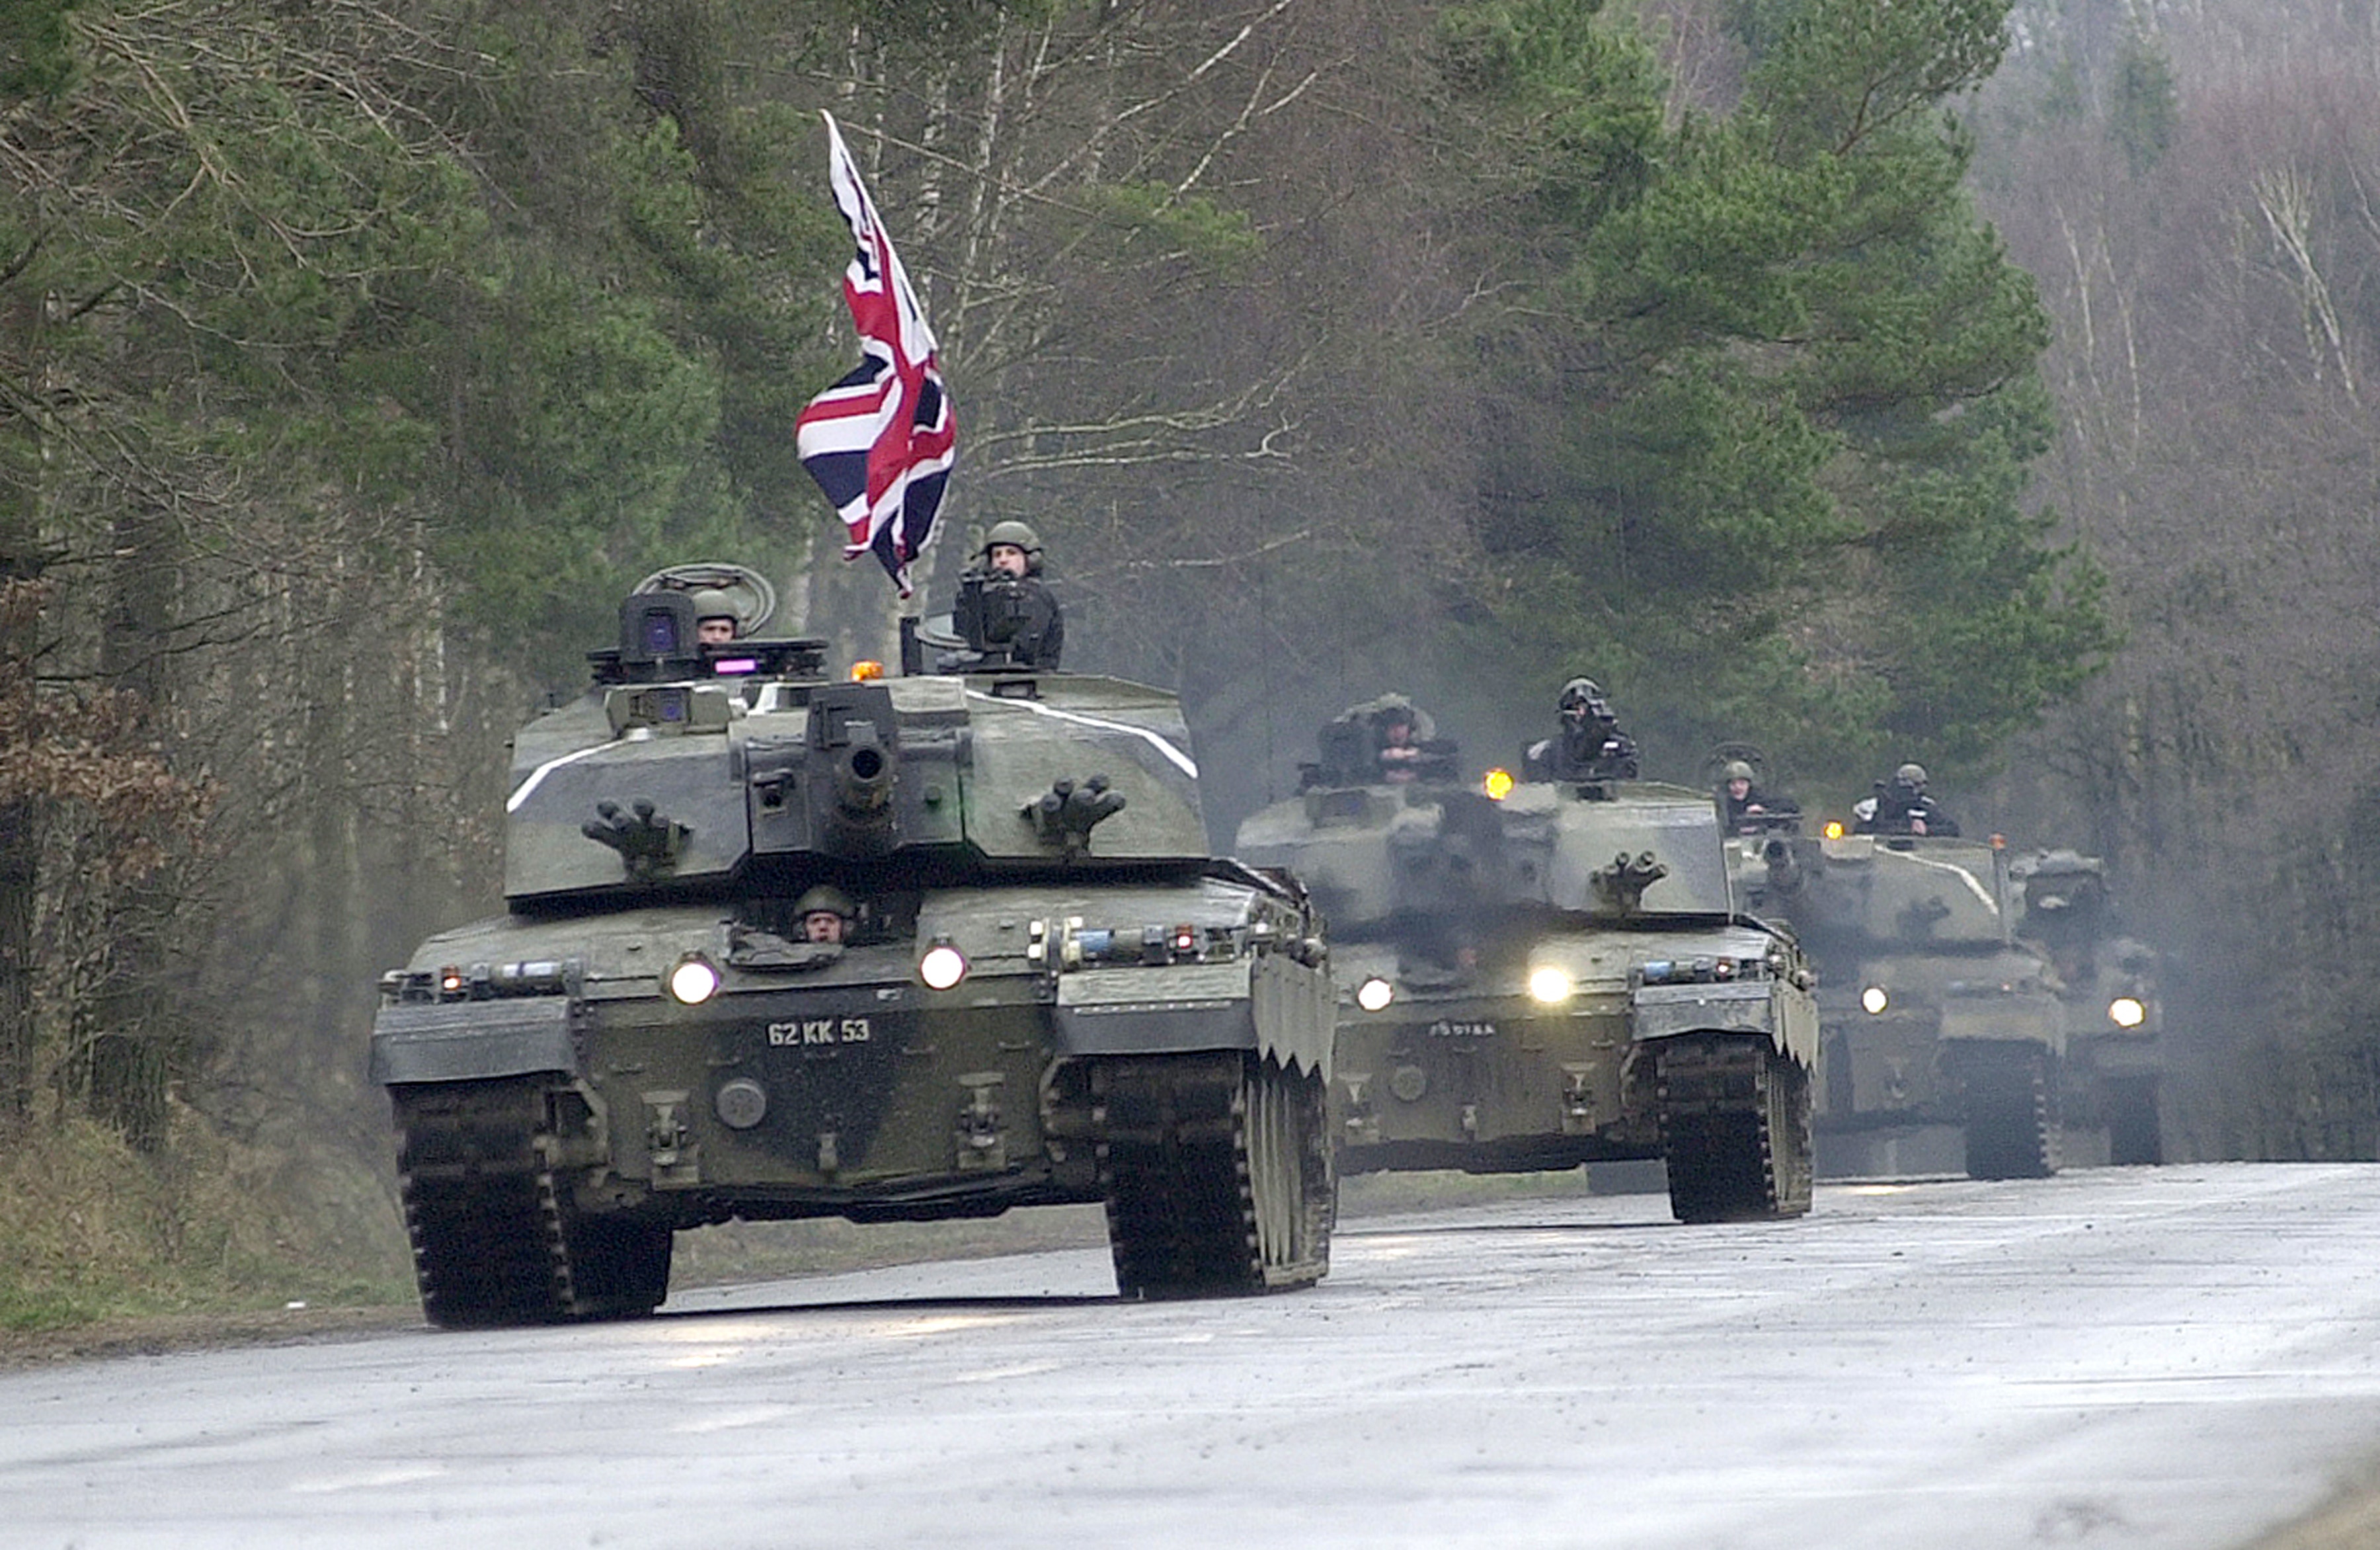 what is the main battle tank of the british army